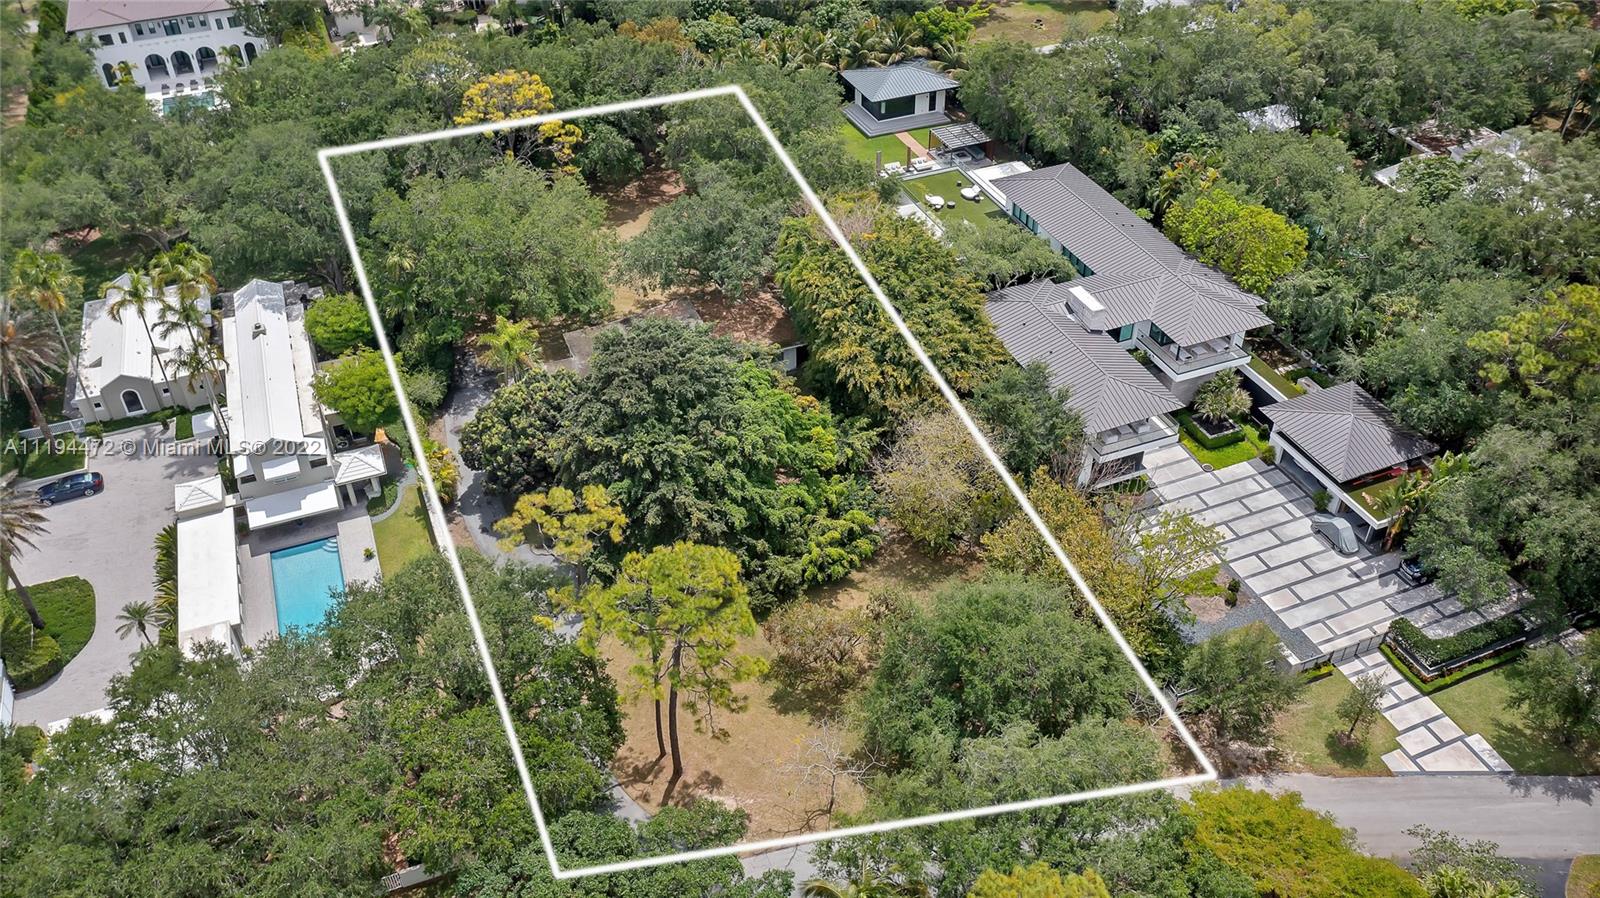 Not many opportunities like this left, in Pinecrest. Amazing, deep, 39,204 sq ft property in prime Pinecrest location. Existing cottage on the property, already connected to municipal water. Showings by appointment.